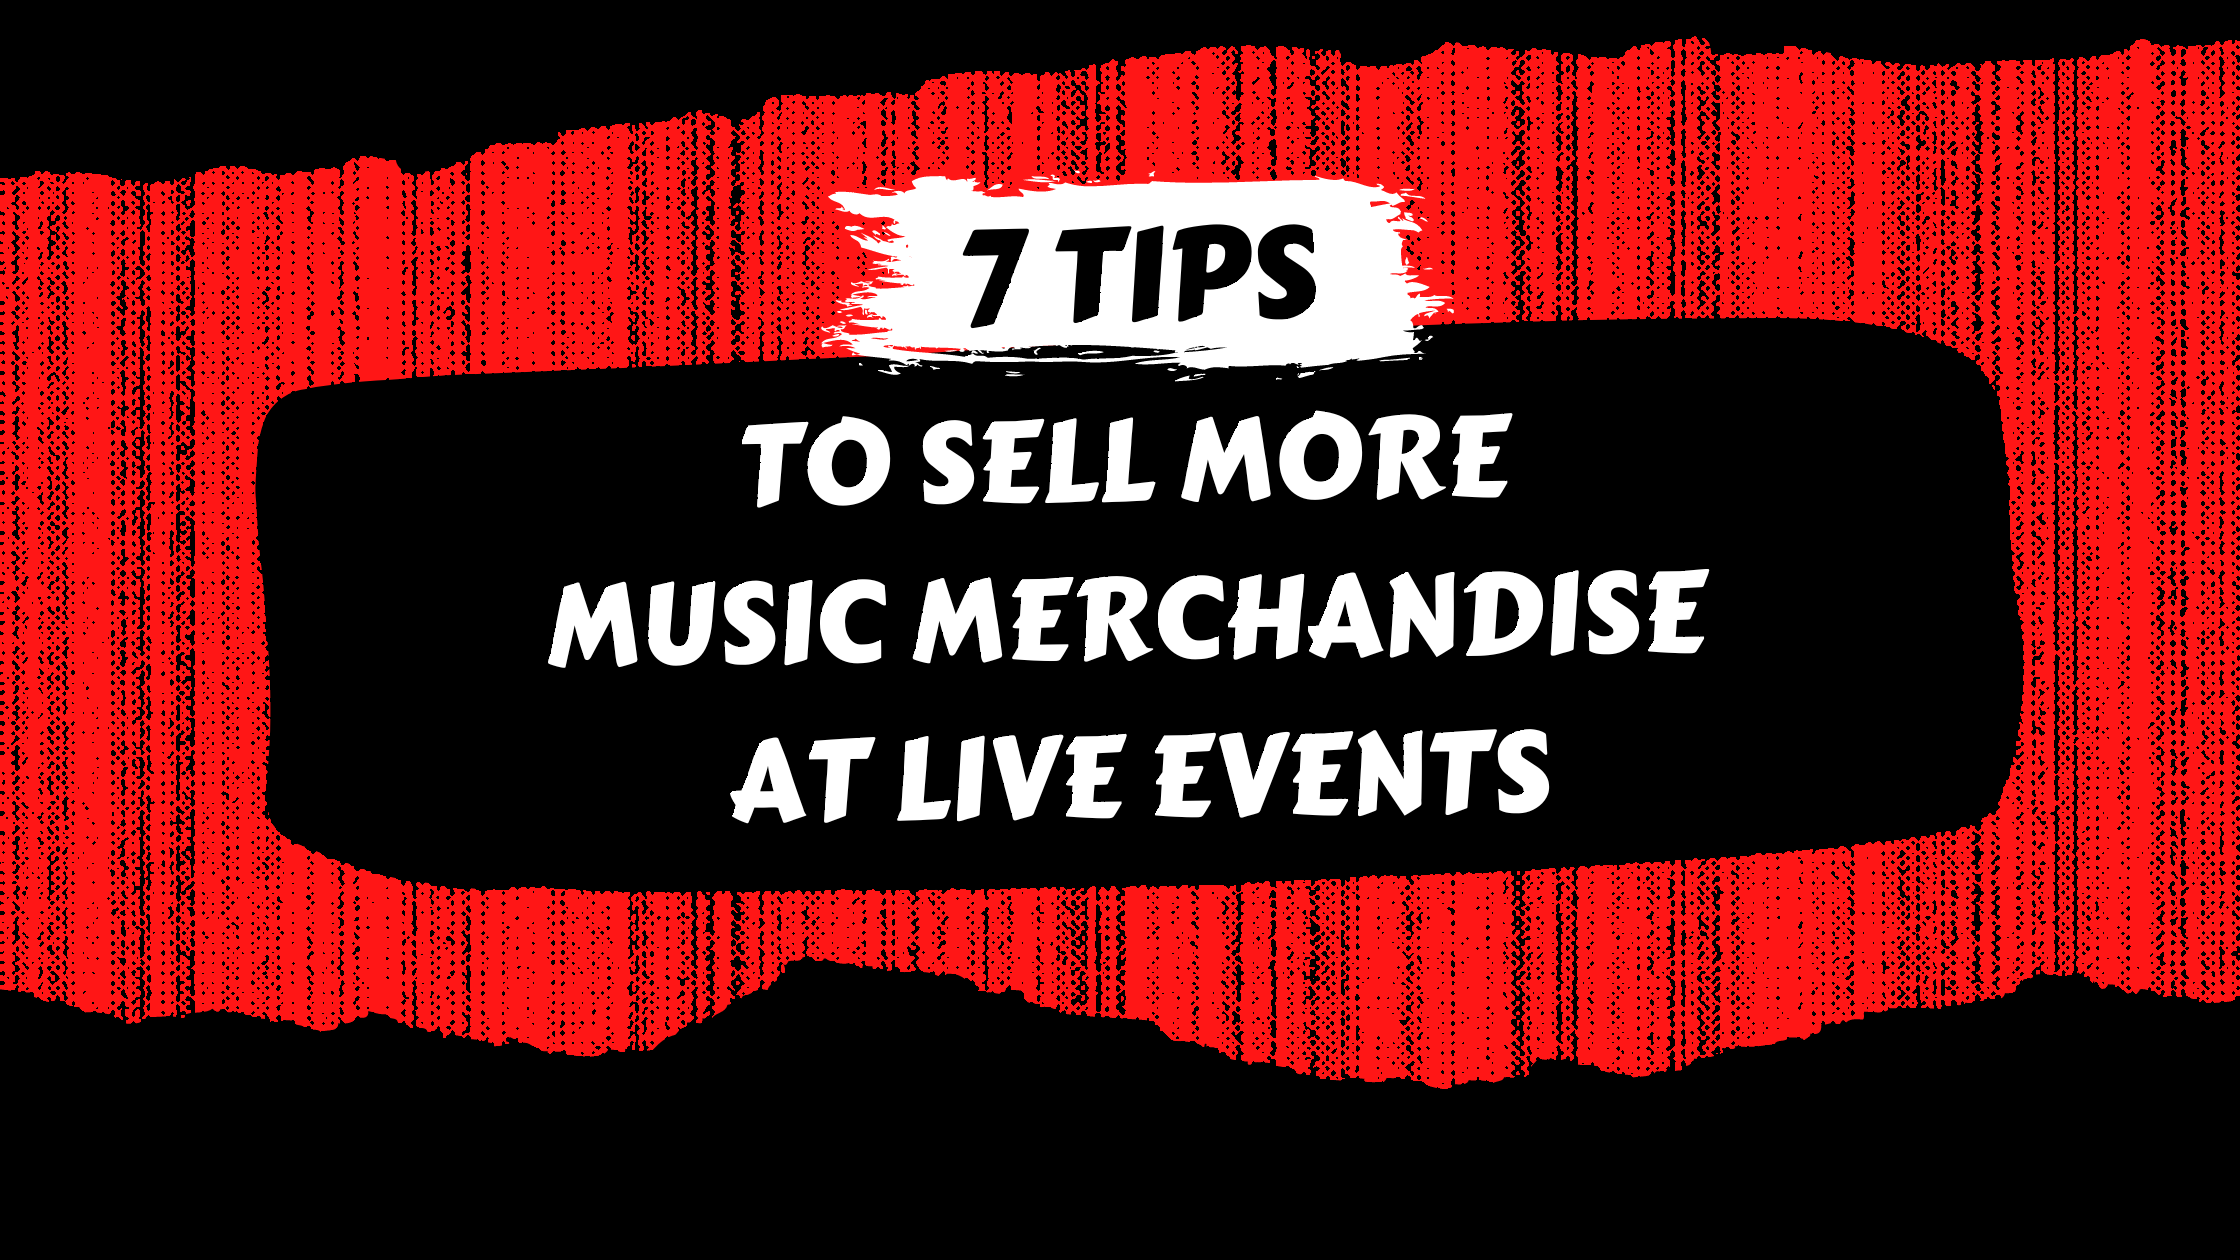 7 Tips to Sell More Music Merchandise at Live Events